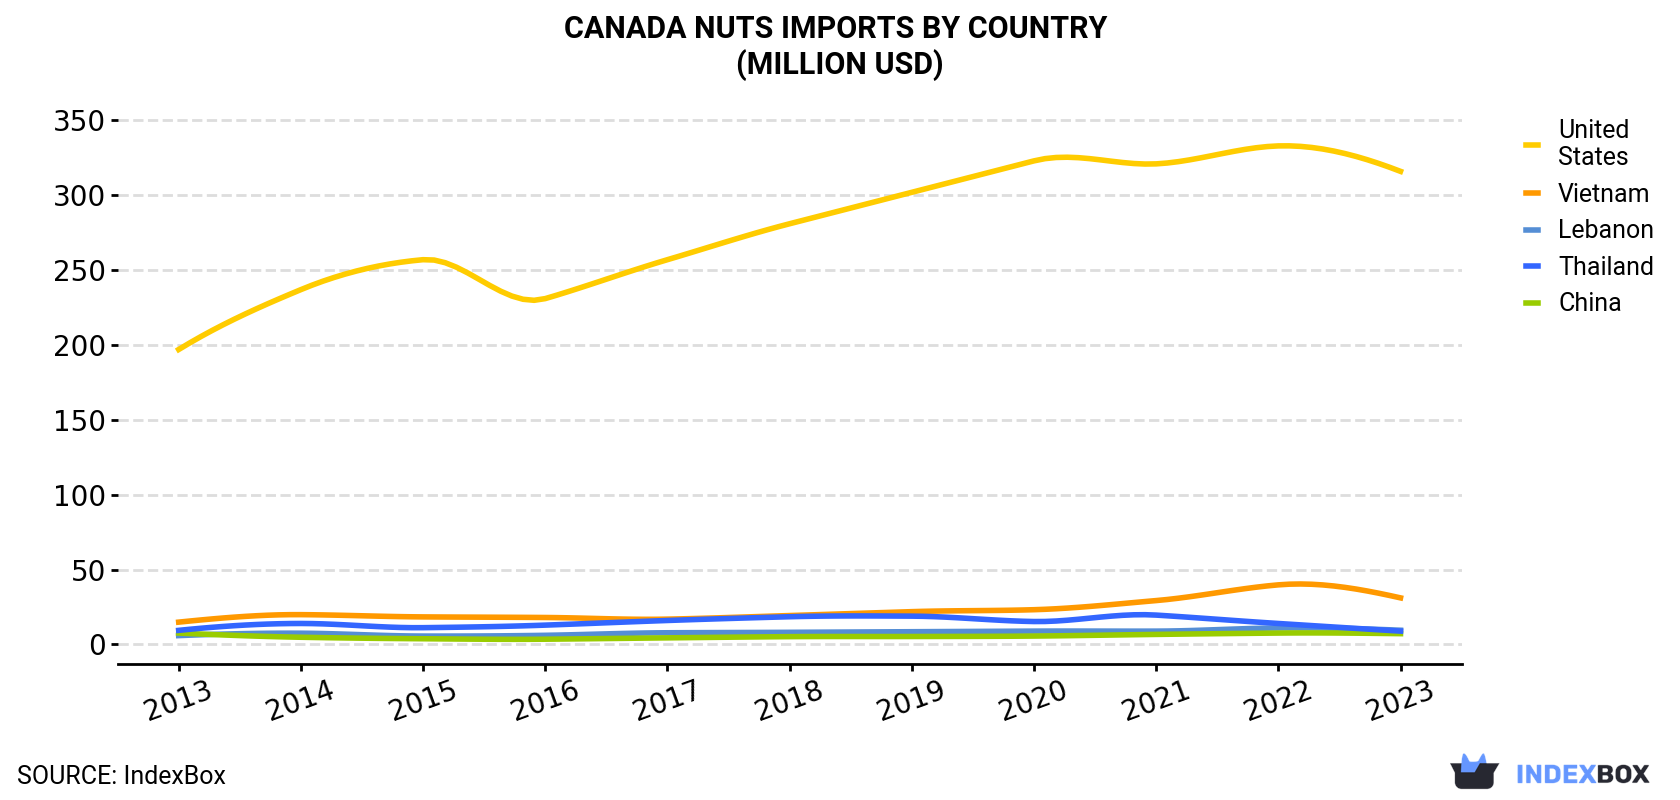 Canada Nuts Imports By Country (Million USD)